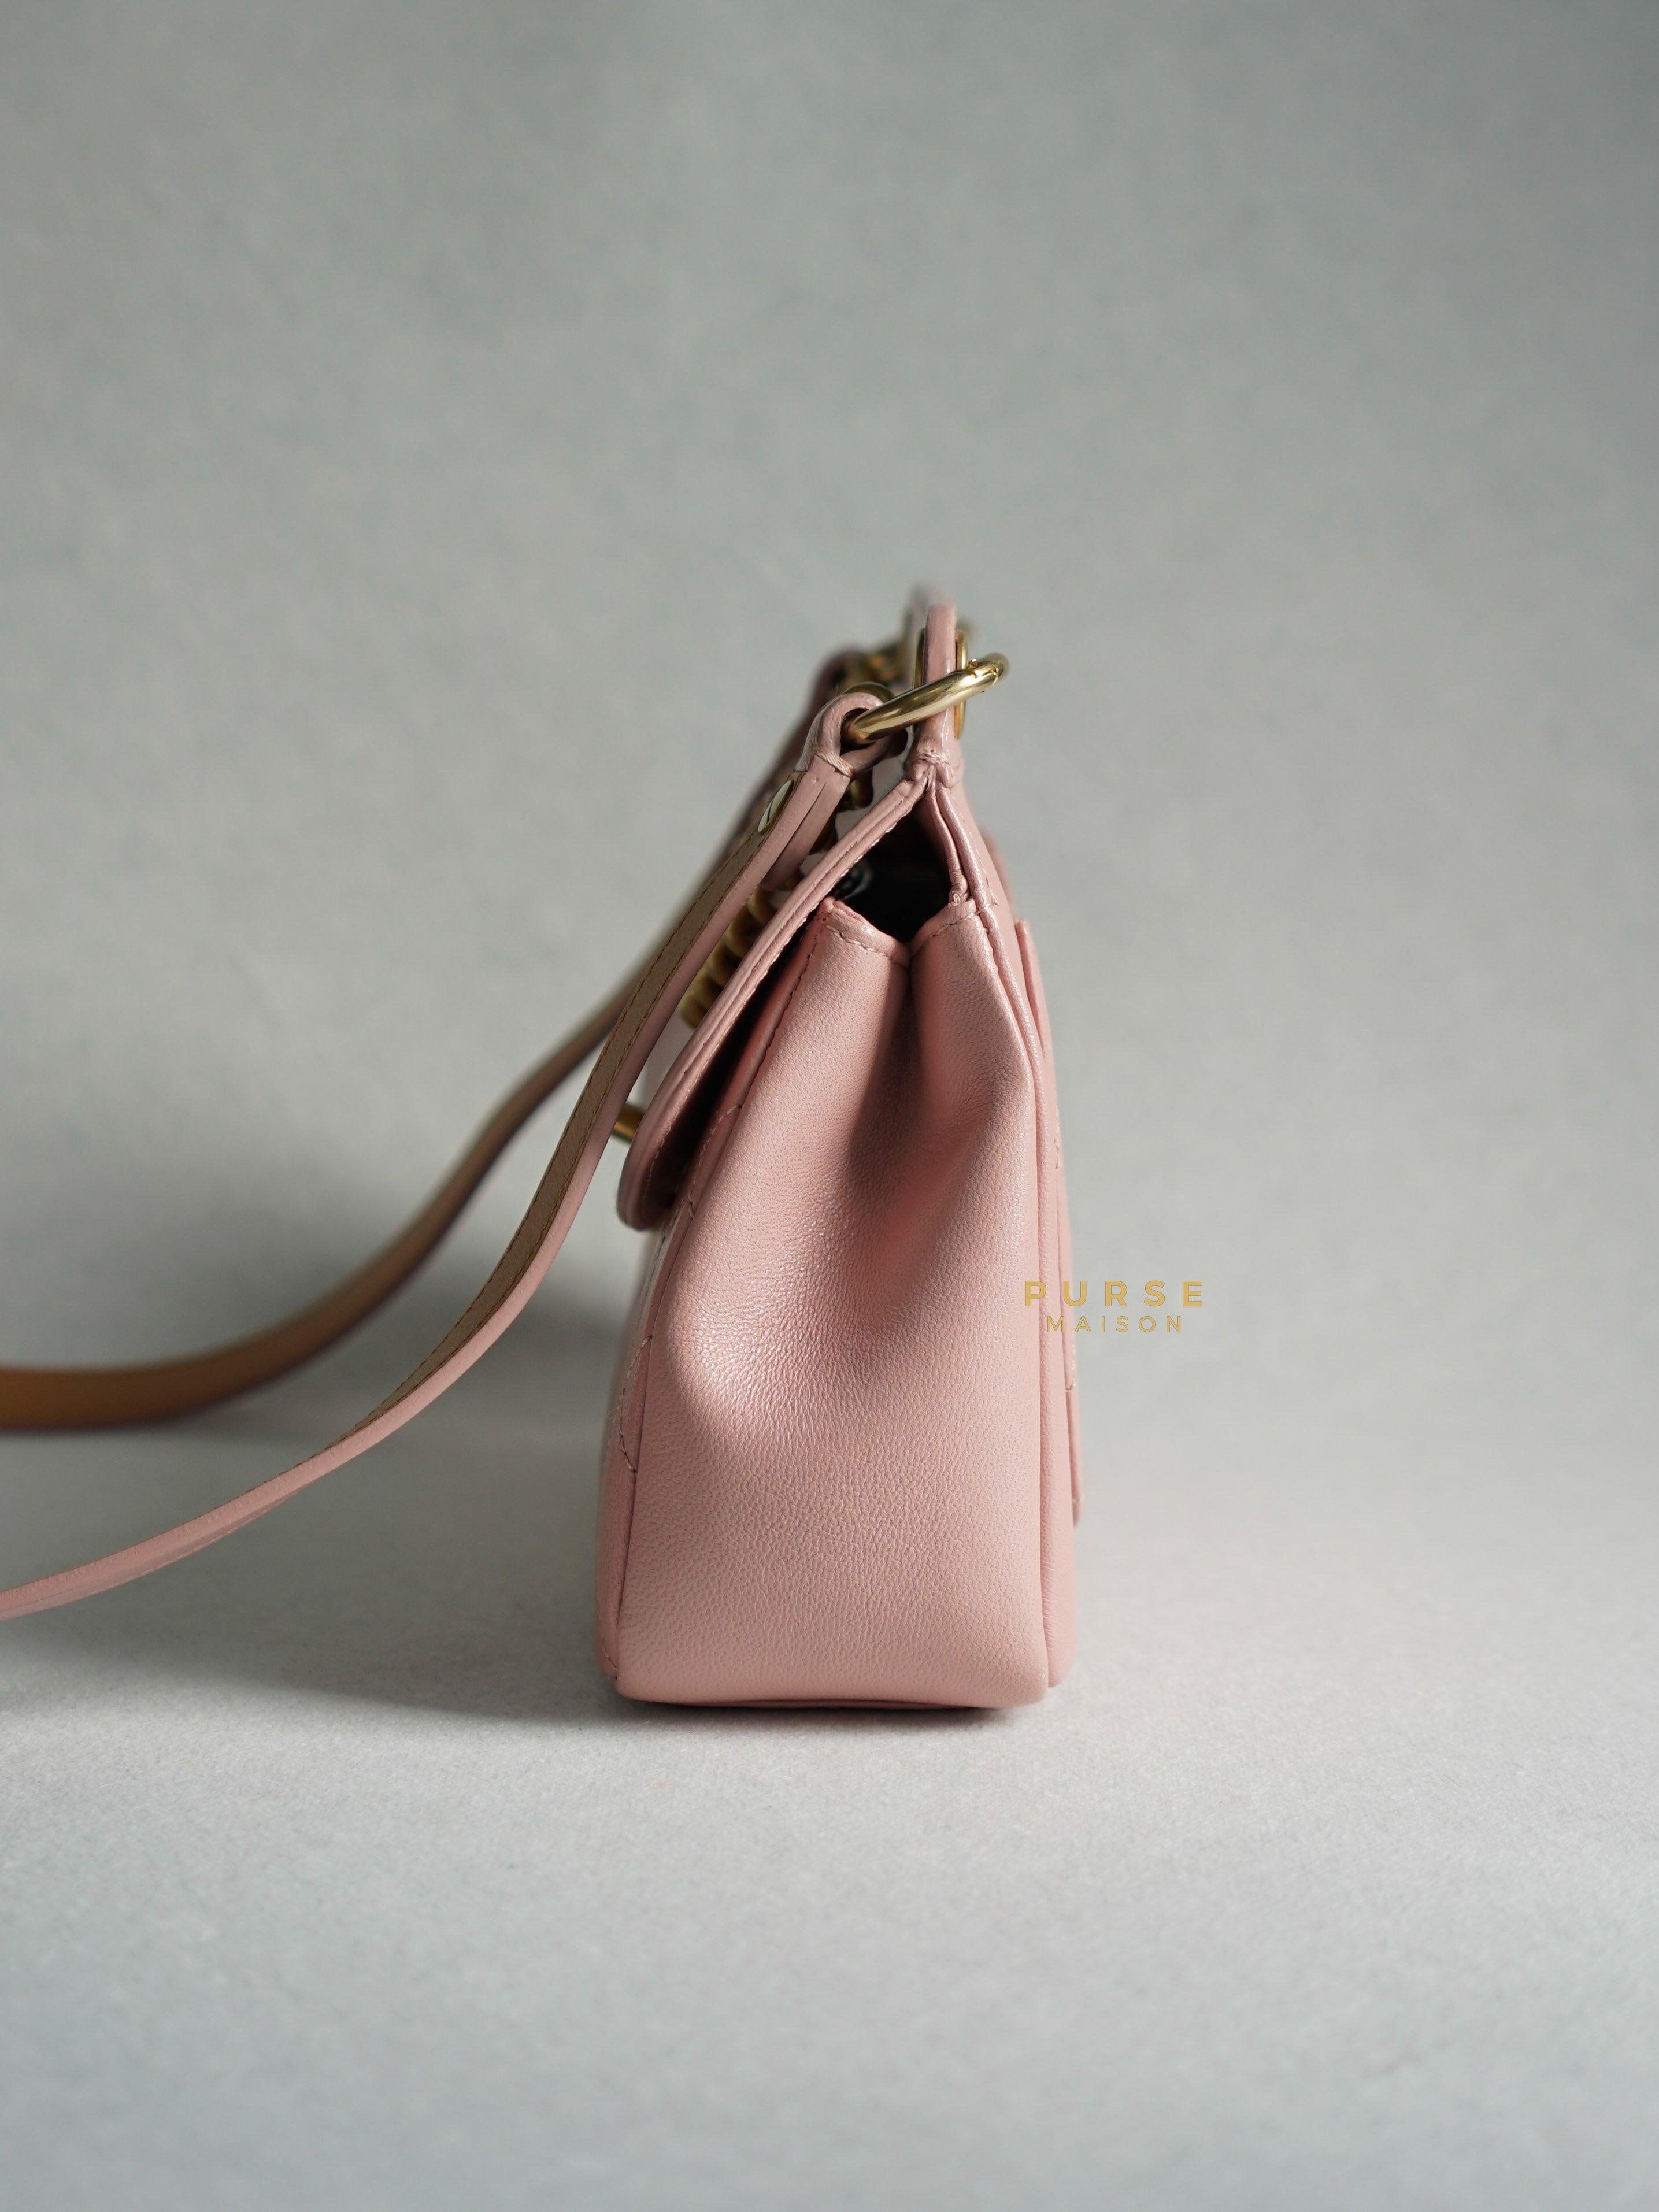 Chanel Curved Flap Bag in Baby Pink Calfskin and Aged Gold Hardware Series 27 | Purse Maison Luxury Bags Shop